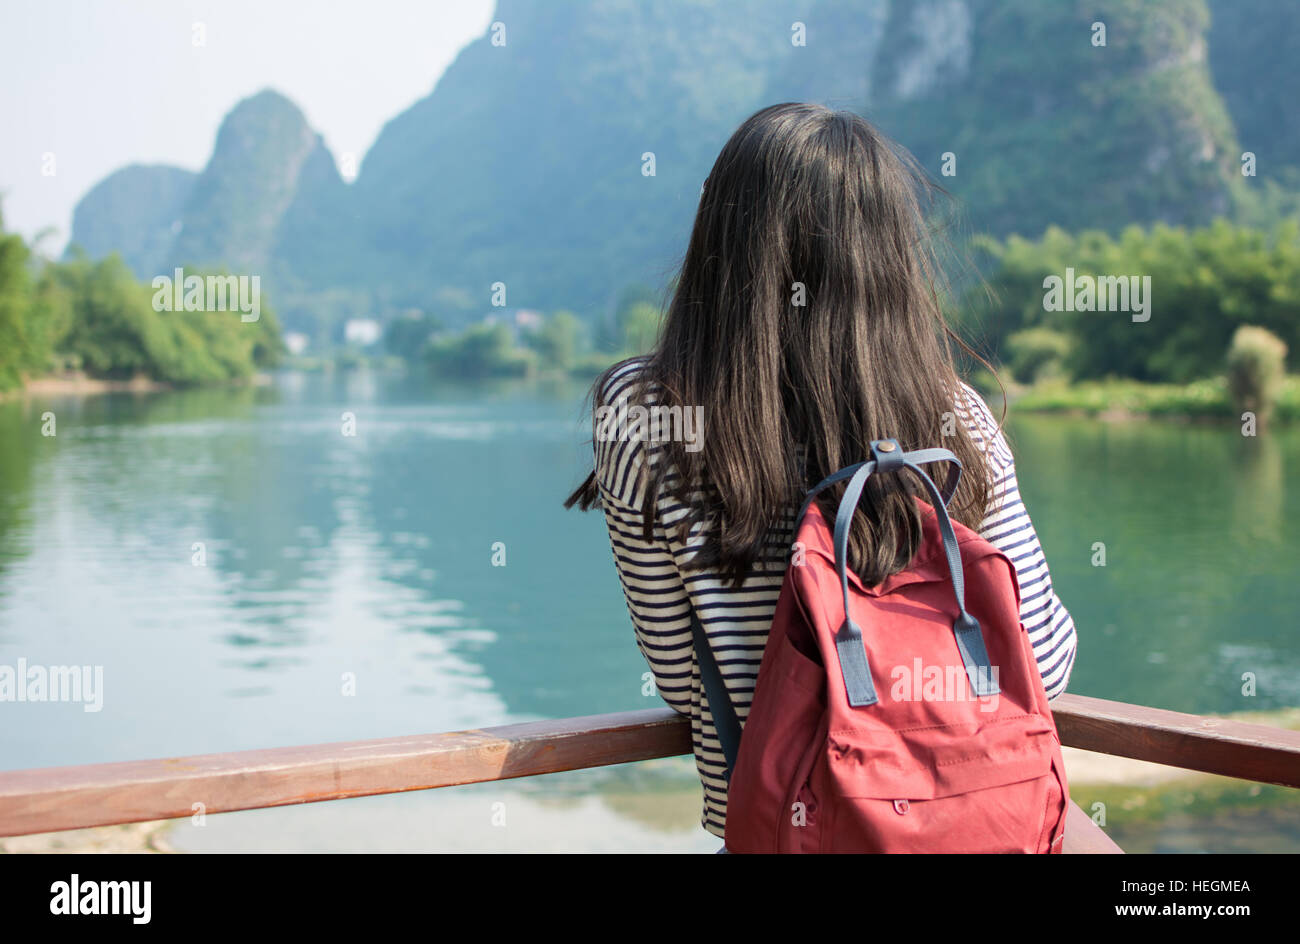 Girl admiring the karst scenic area on a hiking trip Stock Photo